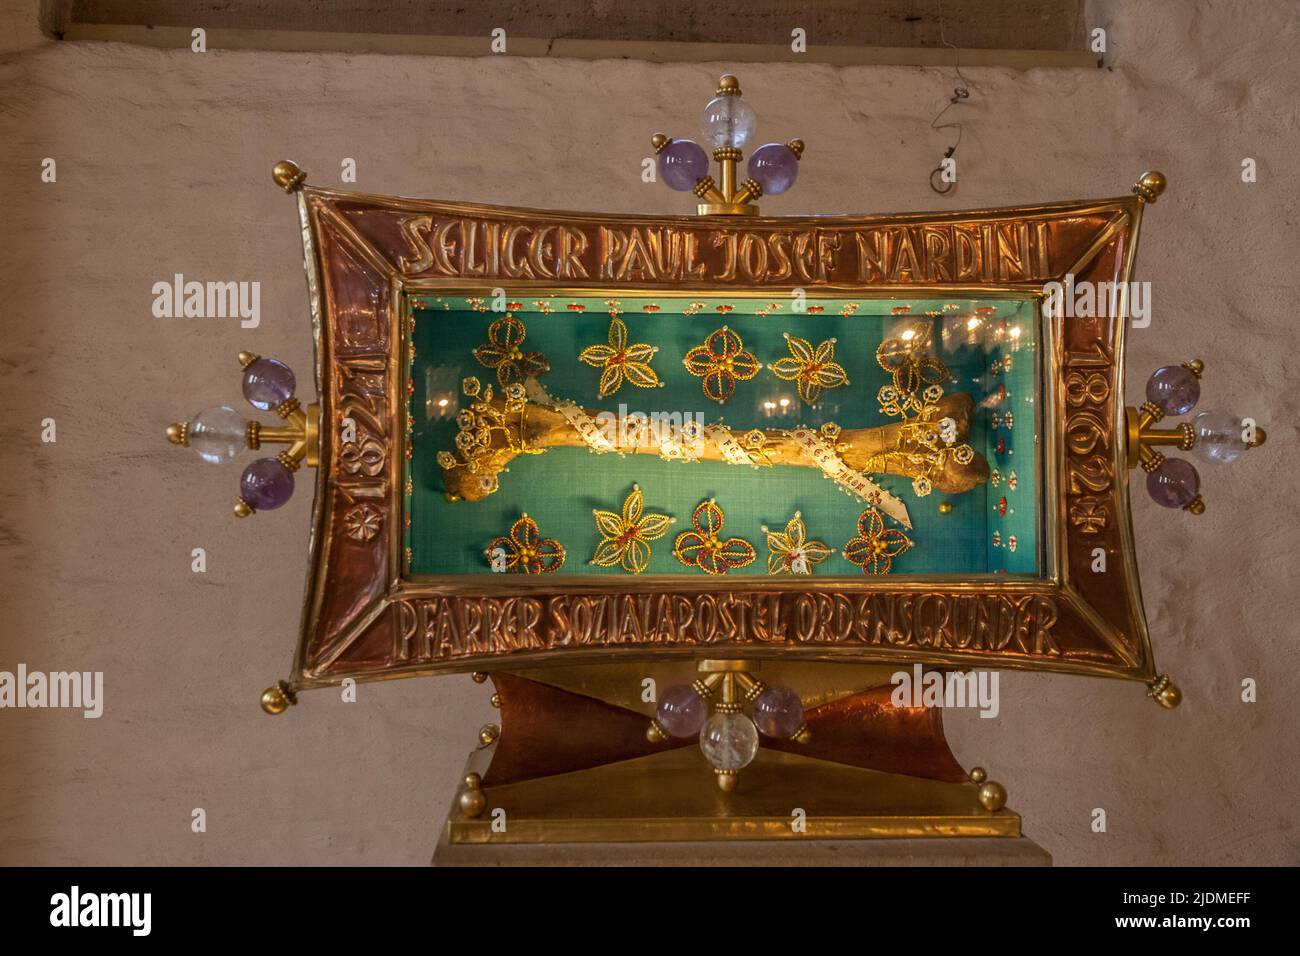 Close-up view of the relic of the beatified priest Paul Joseph Nardini inside the Saint Catherine's chapel of the famous Speyer Cathedral in... Stock Photo